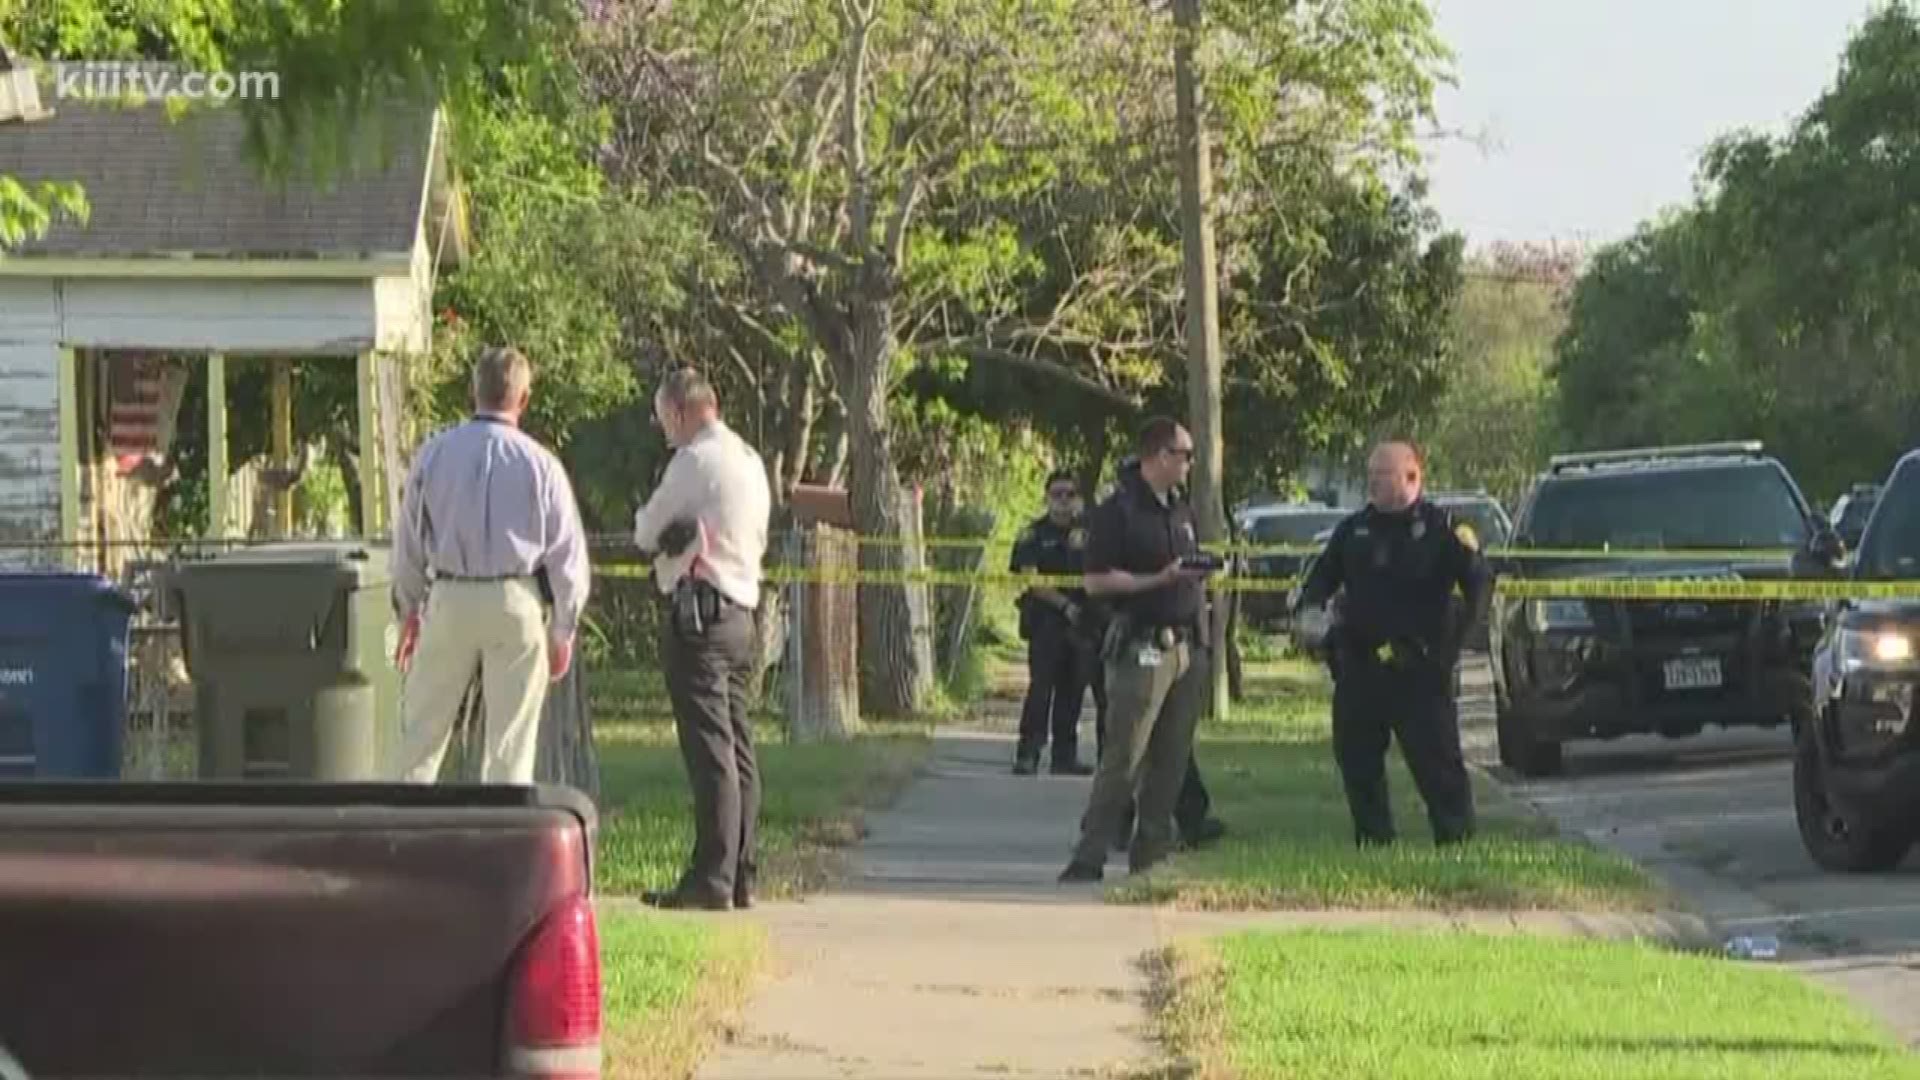 Crime scene investigators were called to a home in Corpus Christi's westside just after 5:30 p.m. Tuesday to investigate an officer-involved shooting.